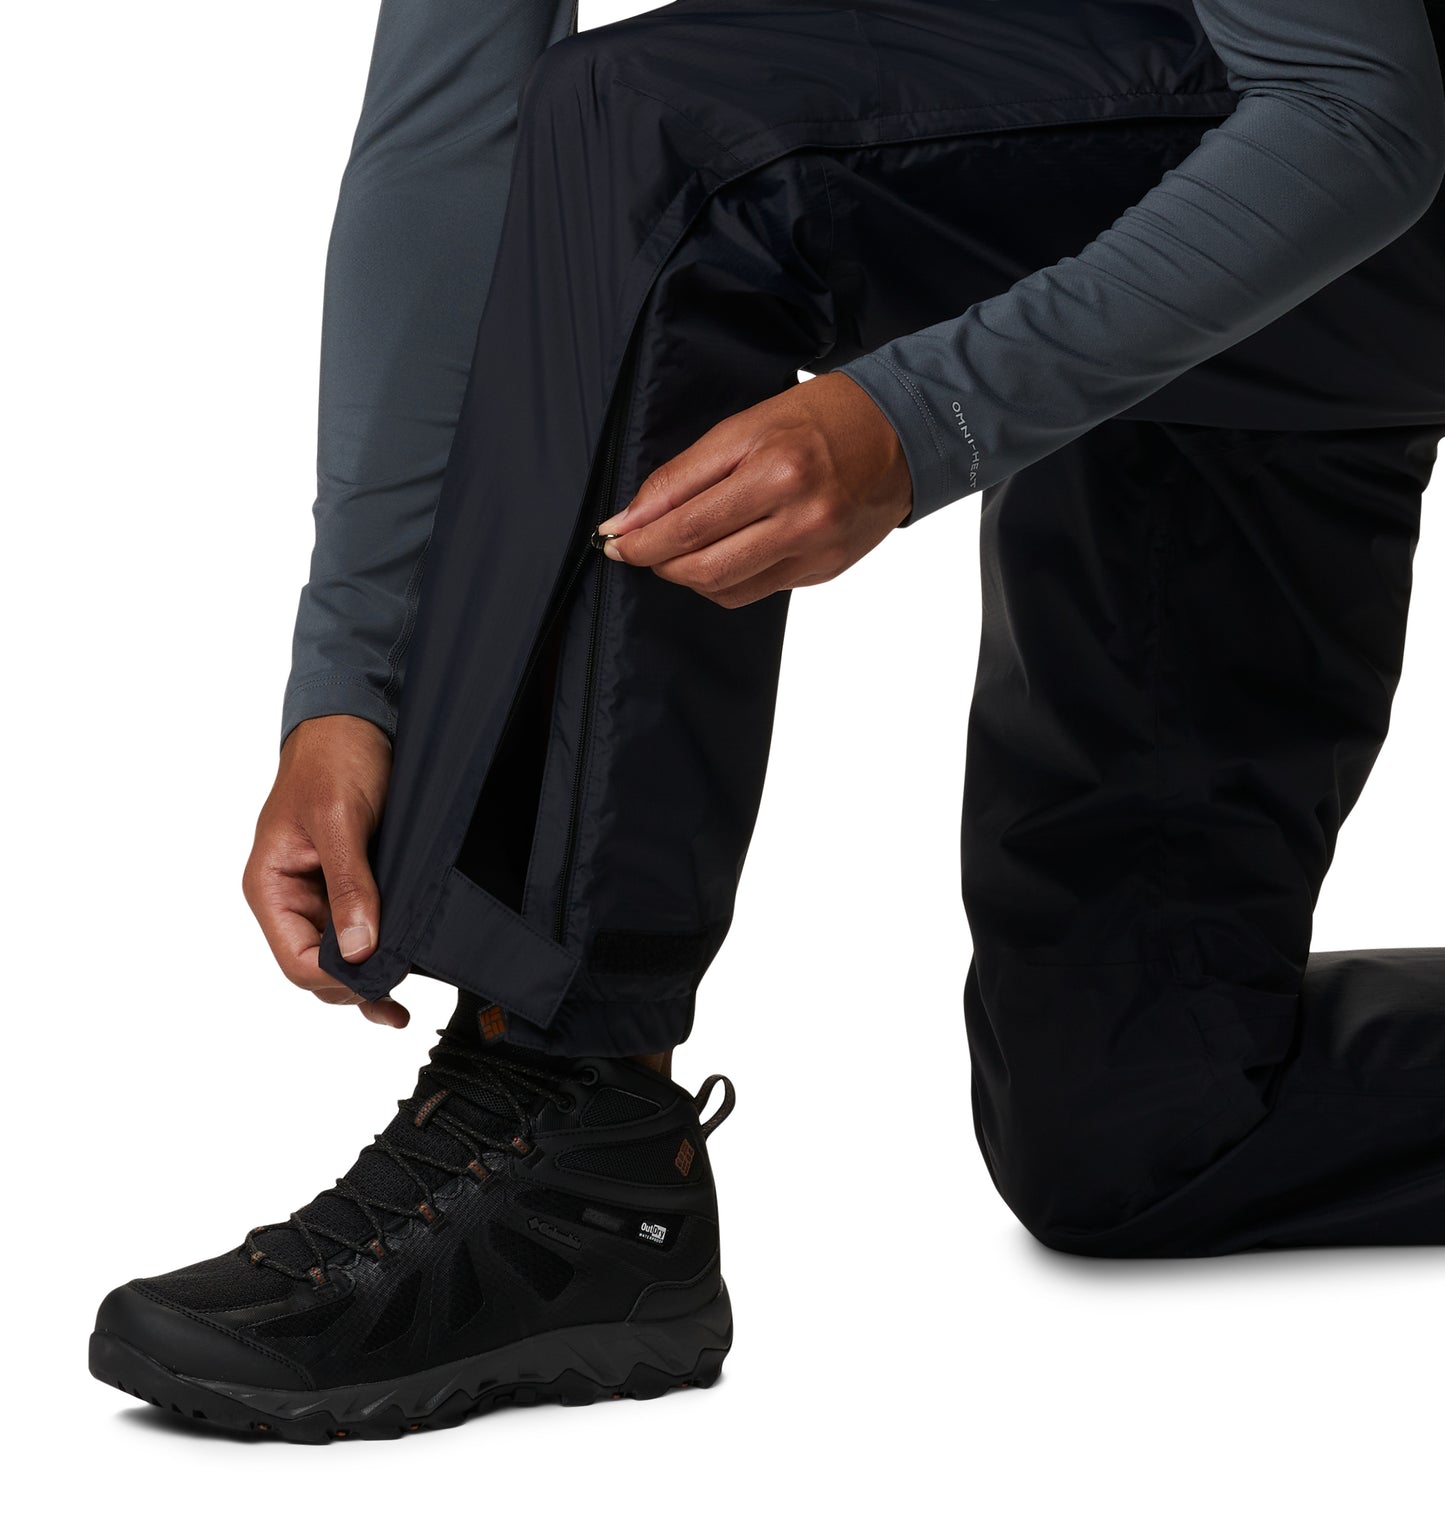 Pouring Adventure™ II Pant